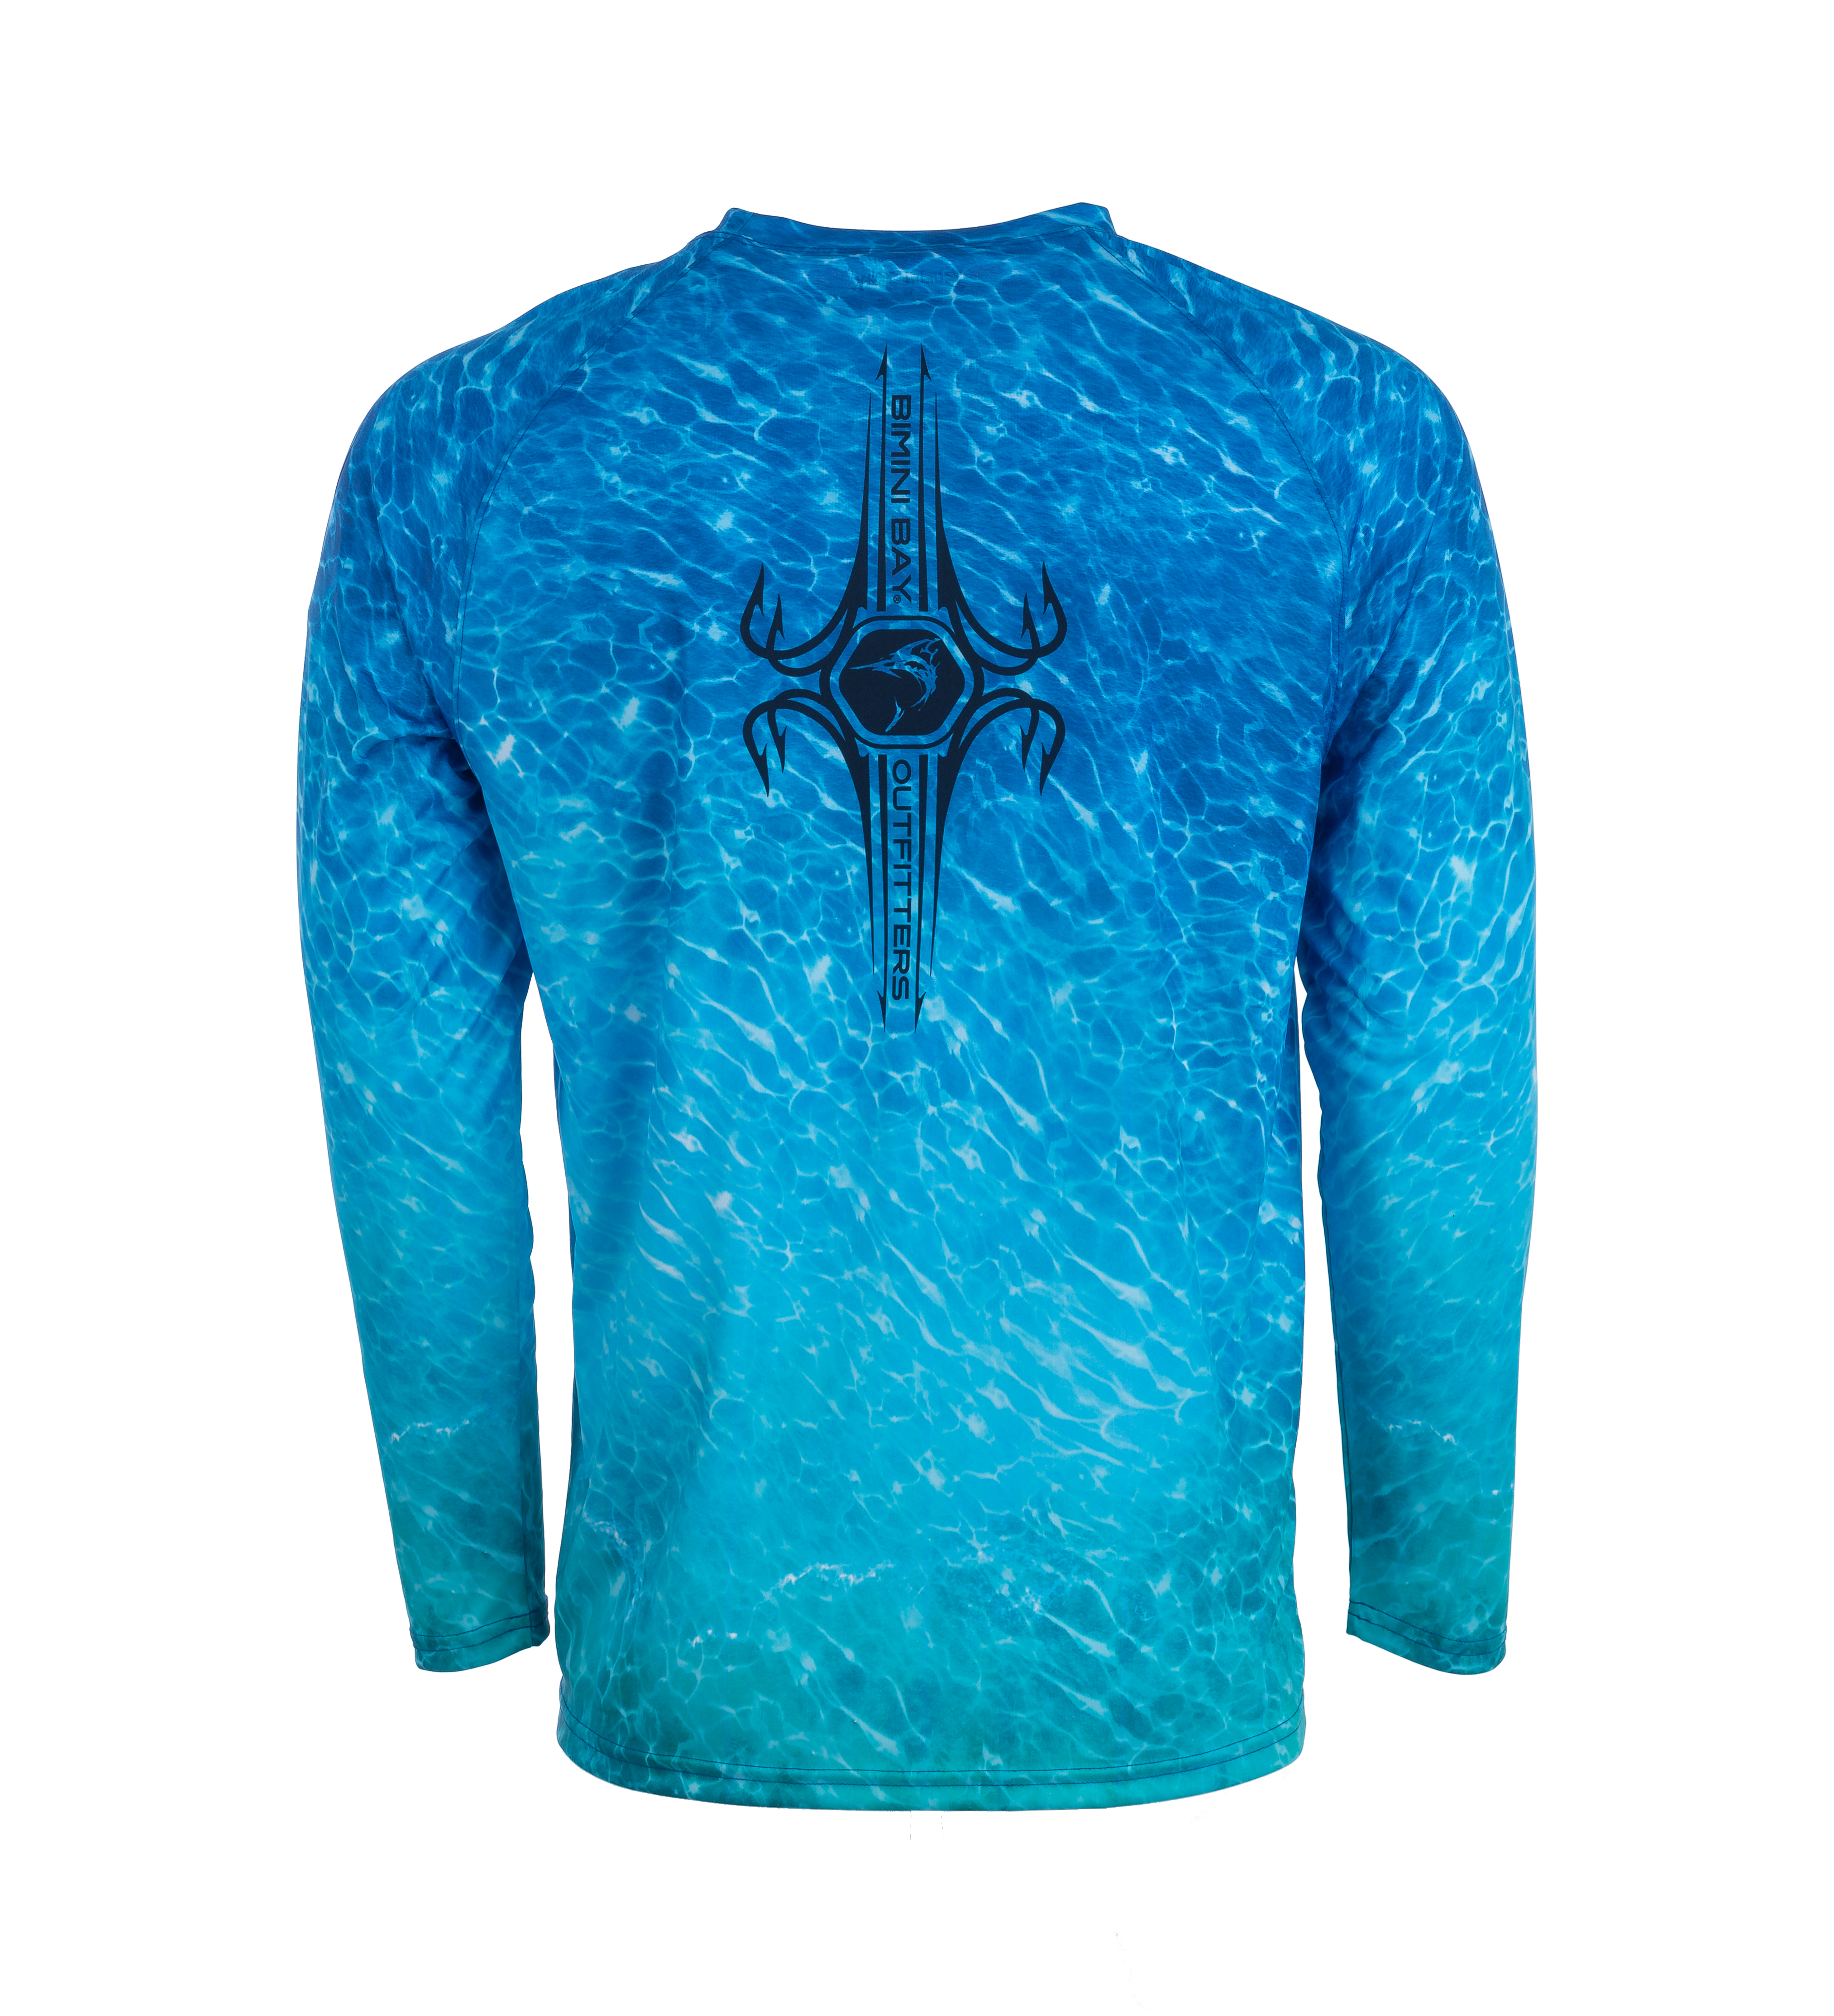 Bimini Bay Outfitters HOOK'M Cabo Crew Polyester Long Sleeve Fishing Shirt  Teal